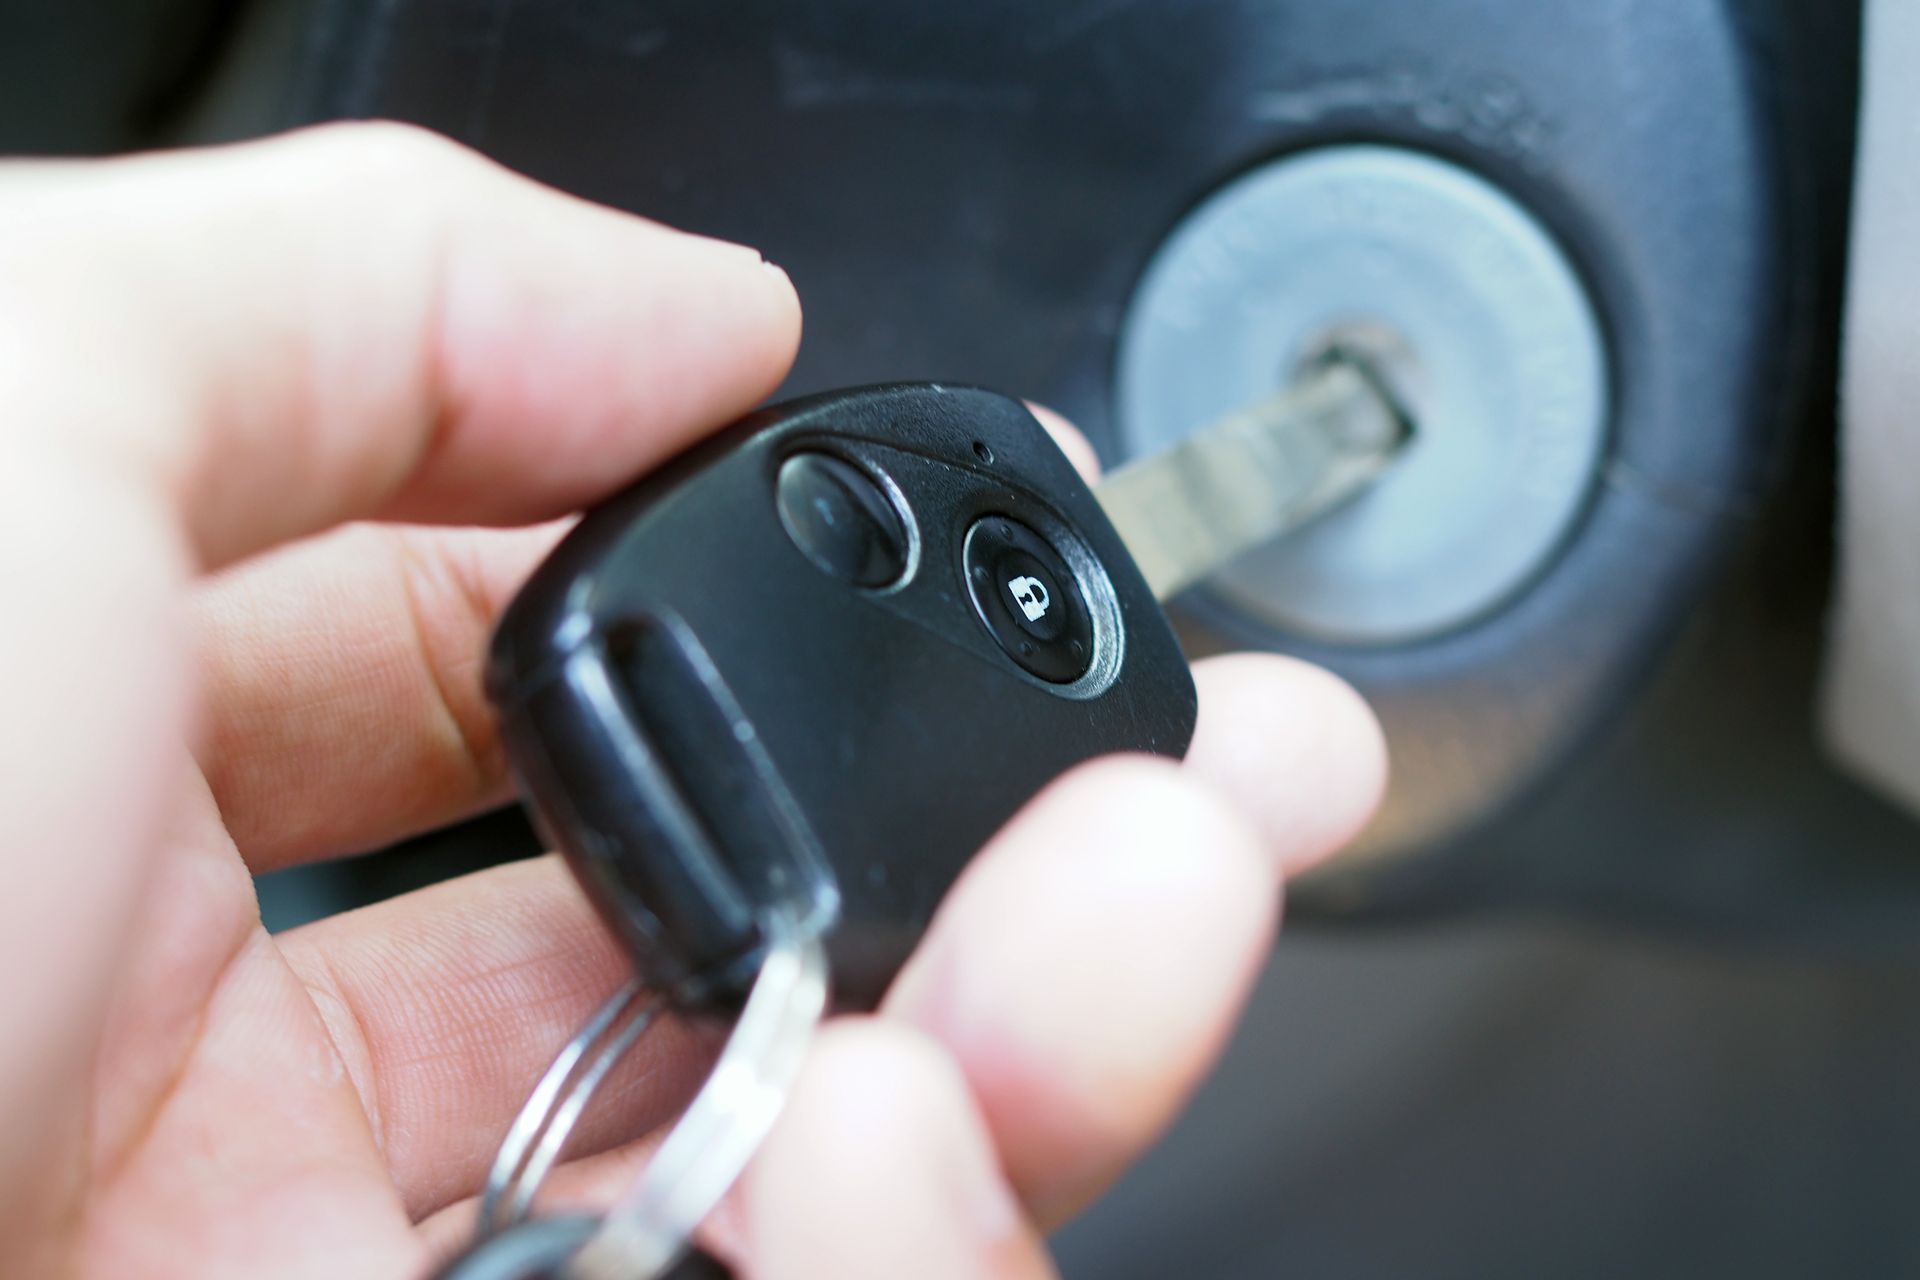 A person is holding a car key in their hand.